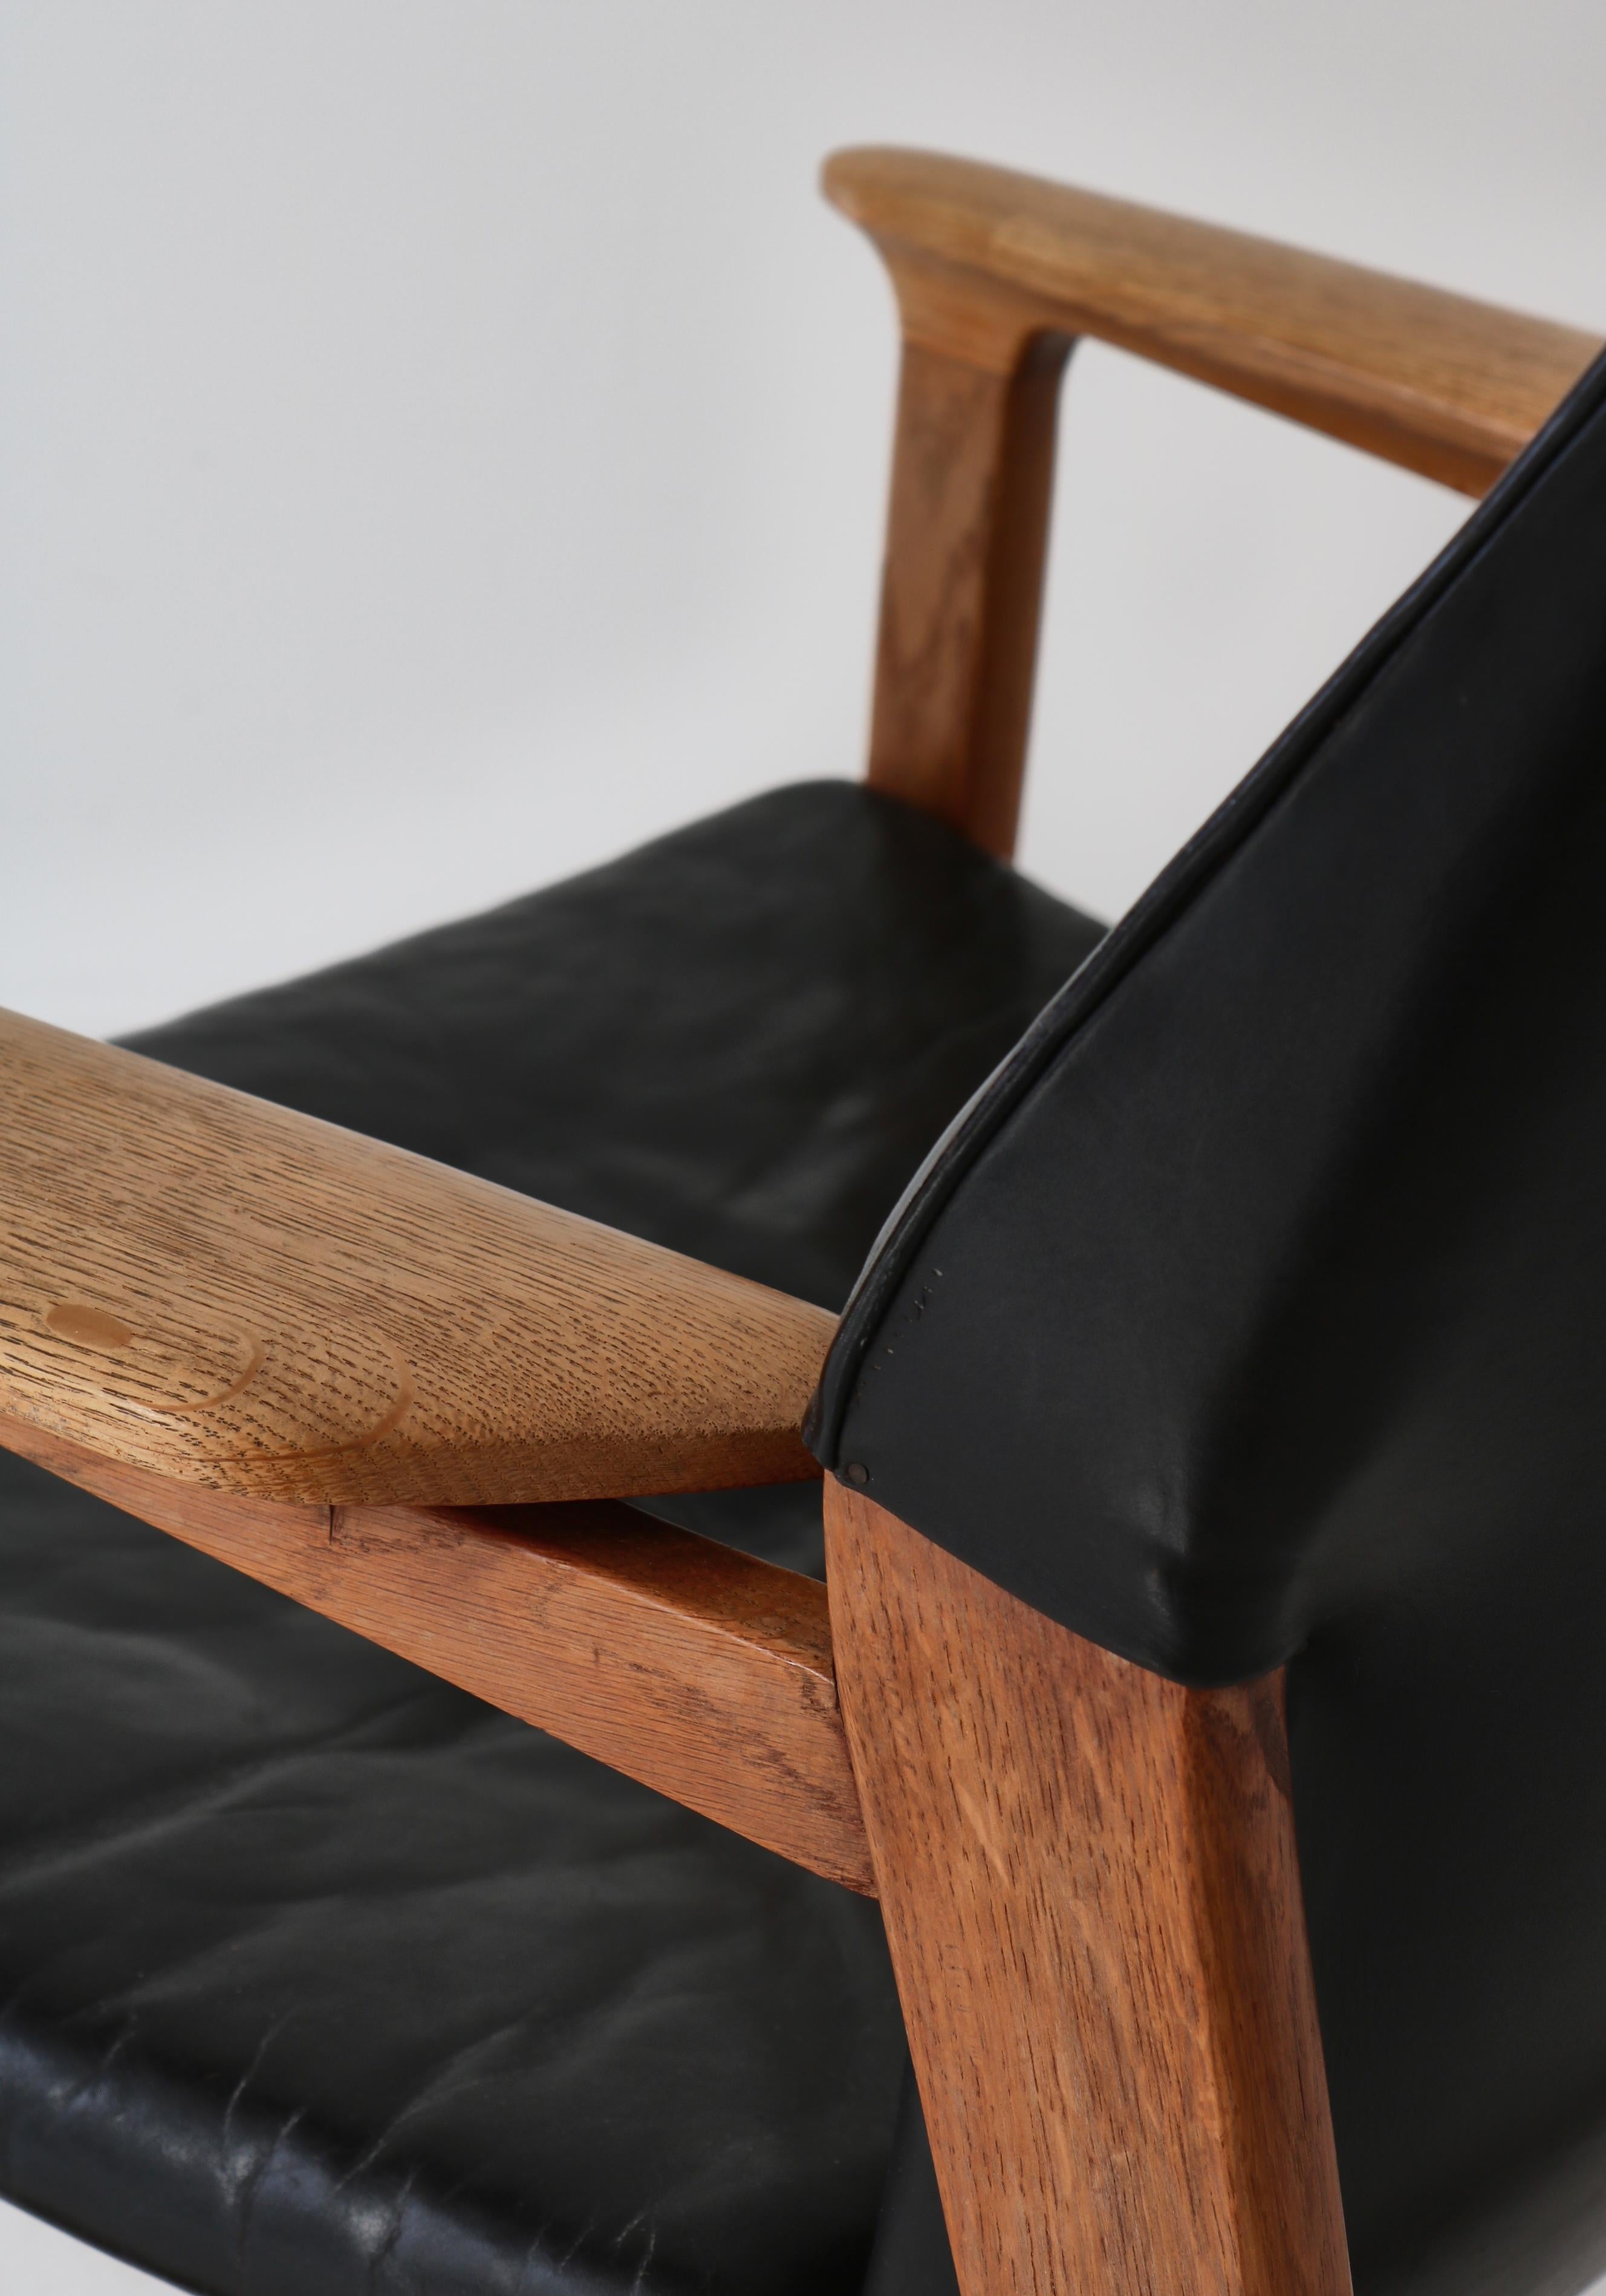 Danish Modern Lounge Chair in Patinated Oak & Black Leather by Hans Olsen, 1950s For Sale 6